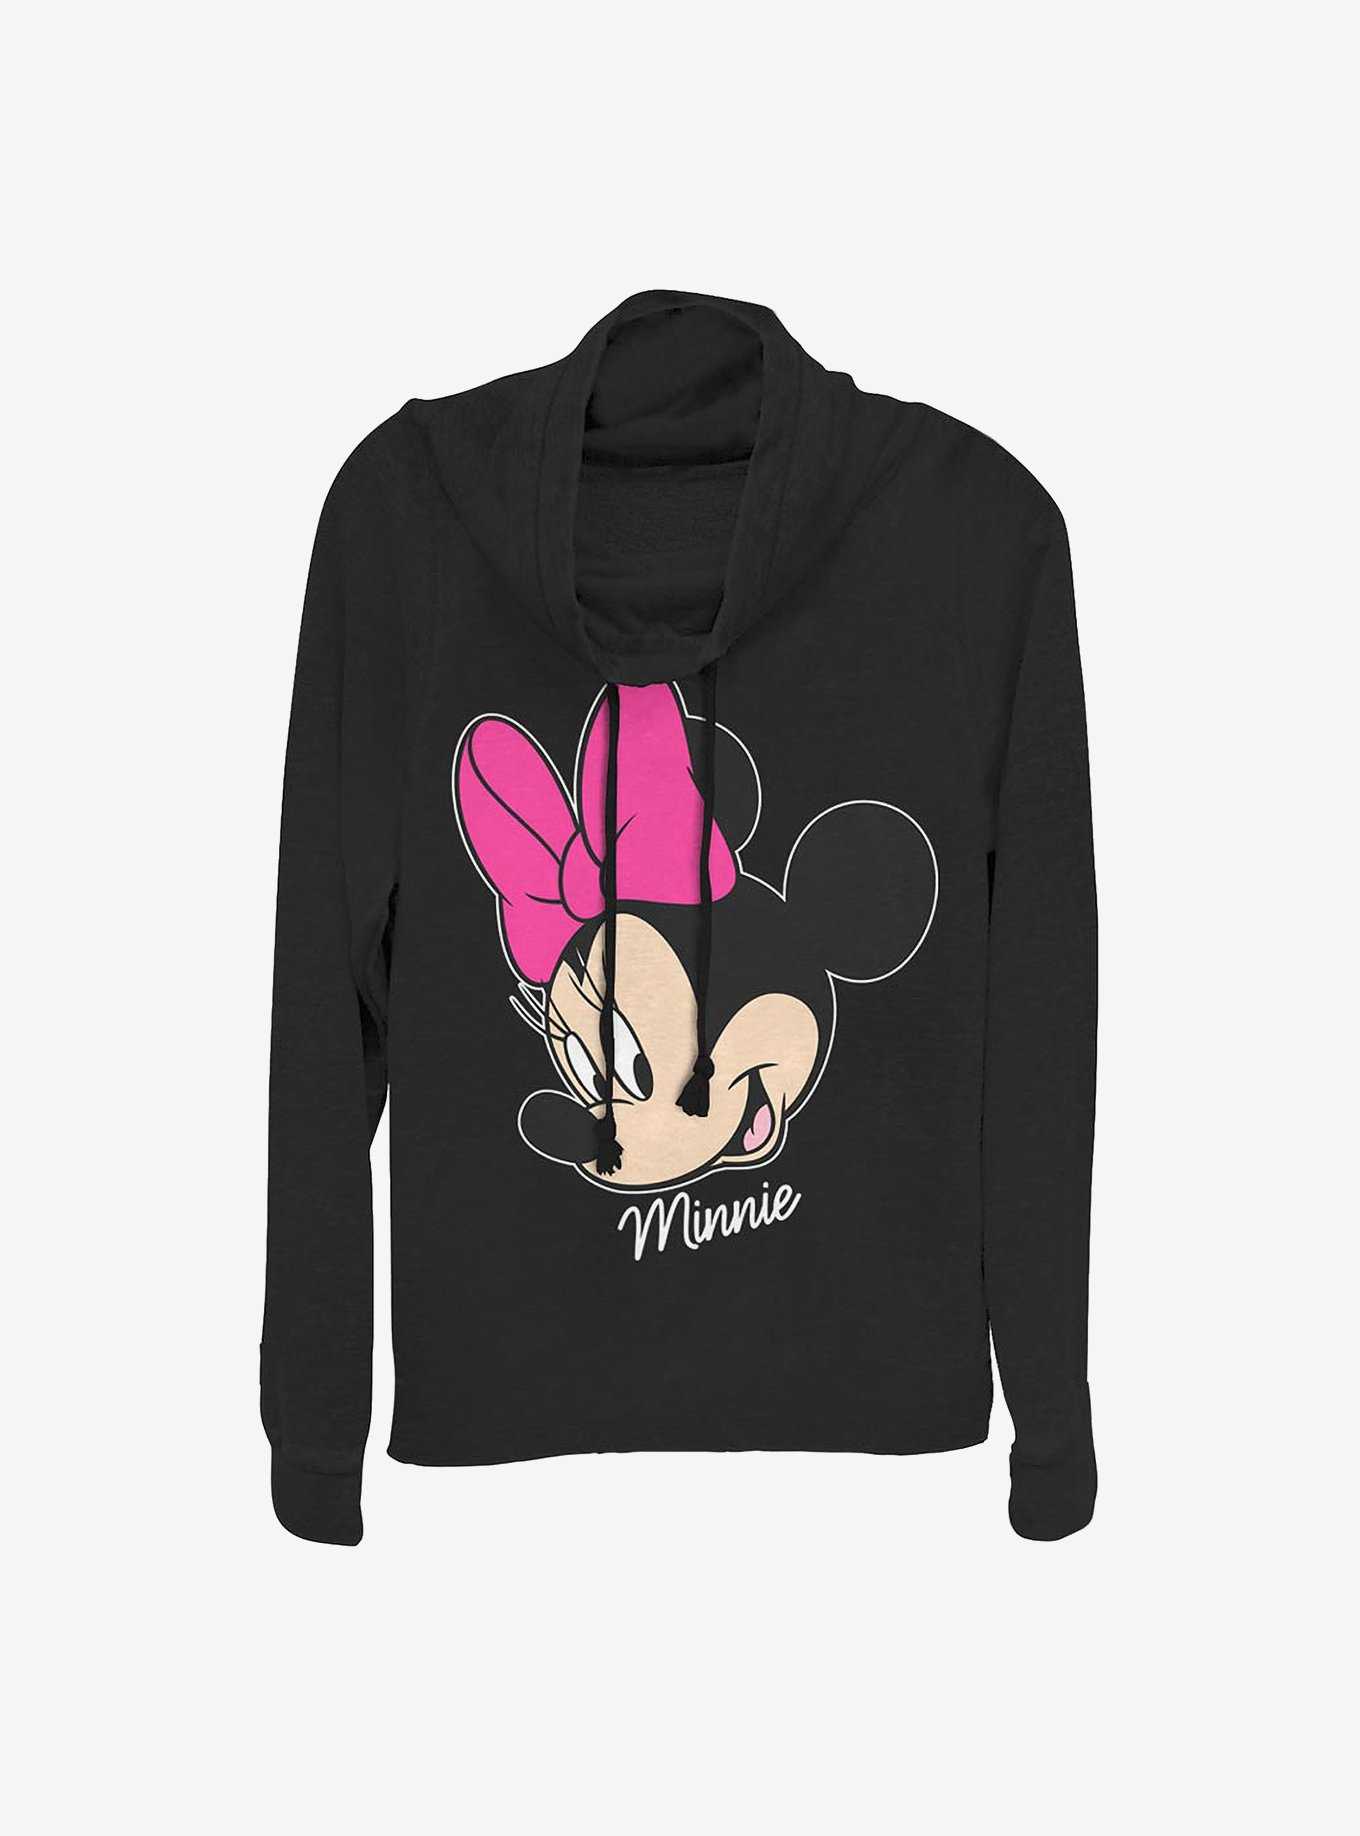 Disney Minnie Mouse Minnie Big Face Cowlneck Long-Sleeve Girls Top, , hi-res